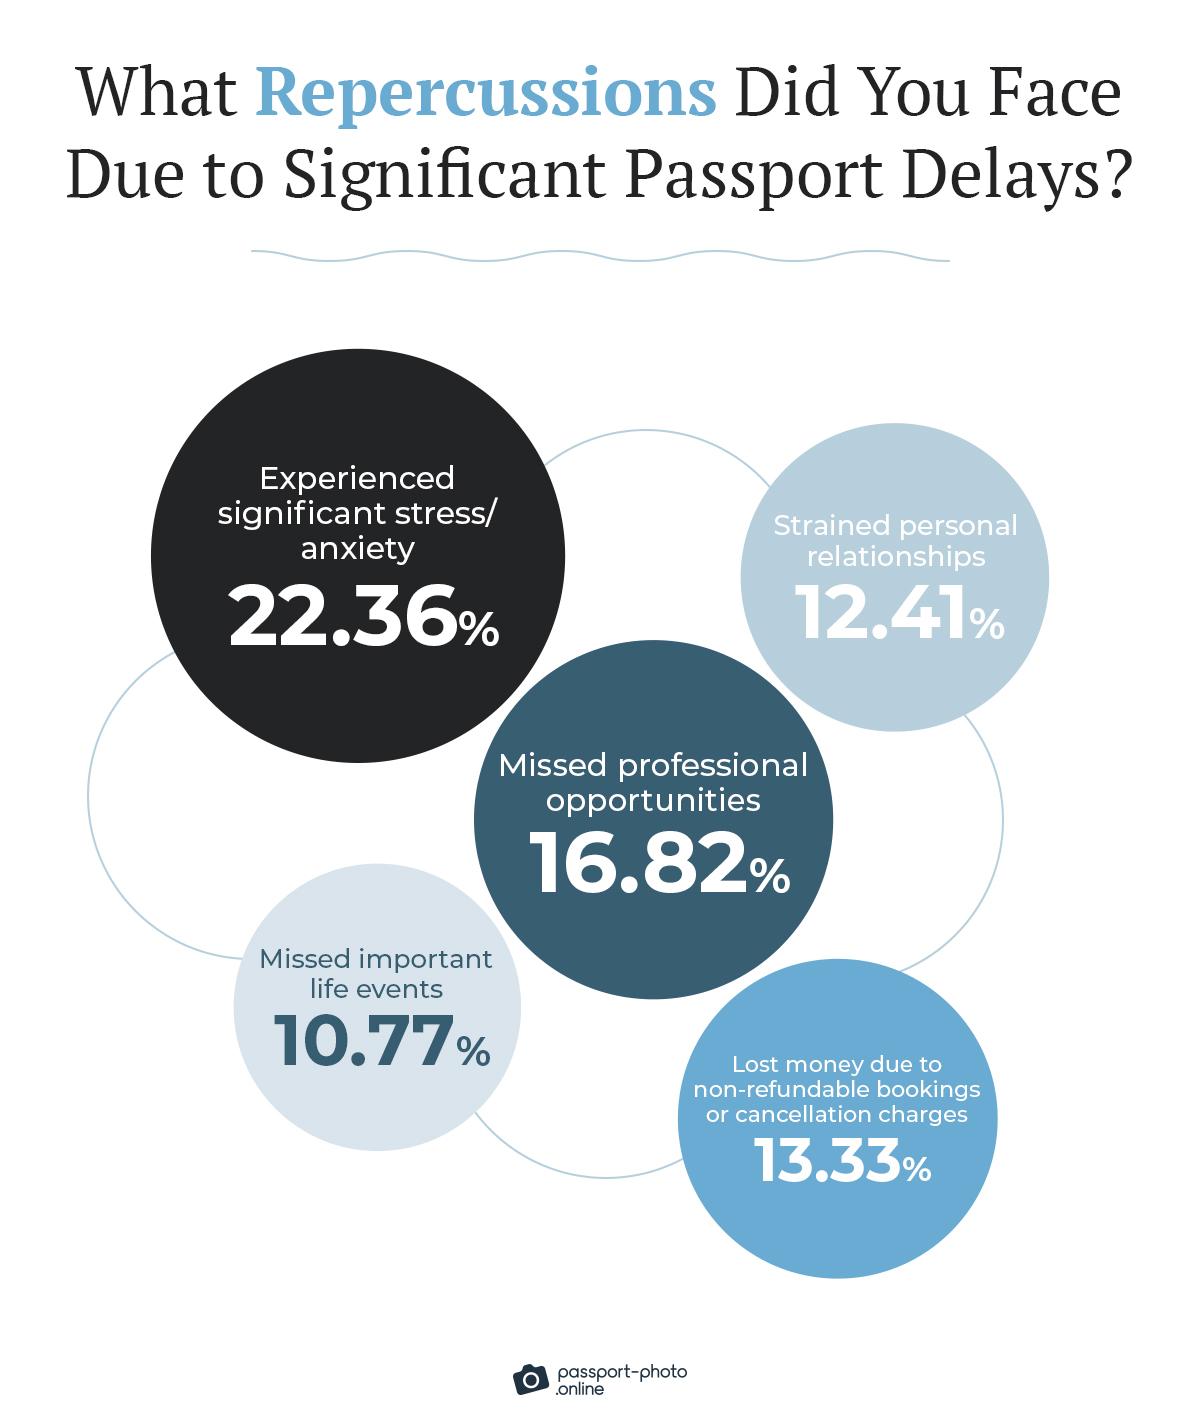 Consequences of disrupted travel plans due to passport processing delays